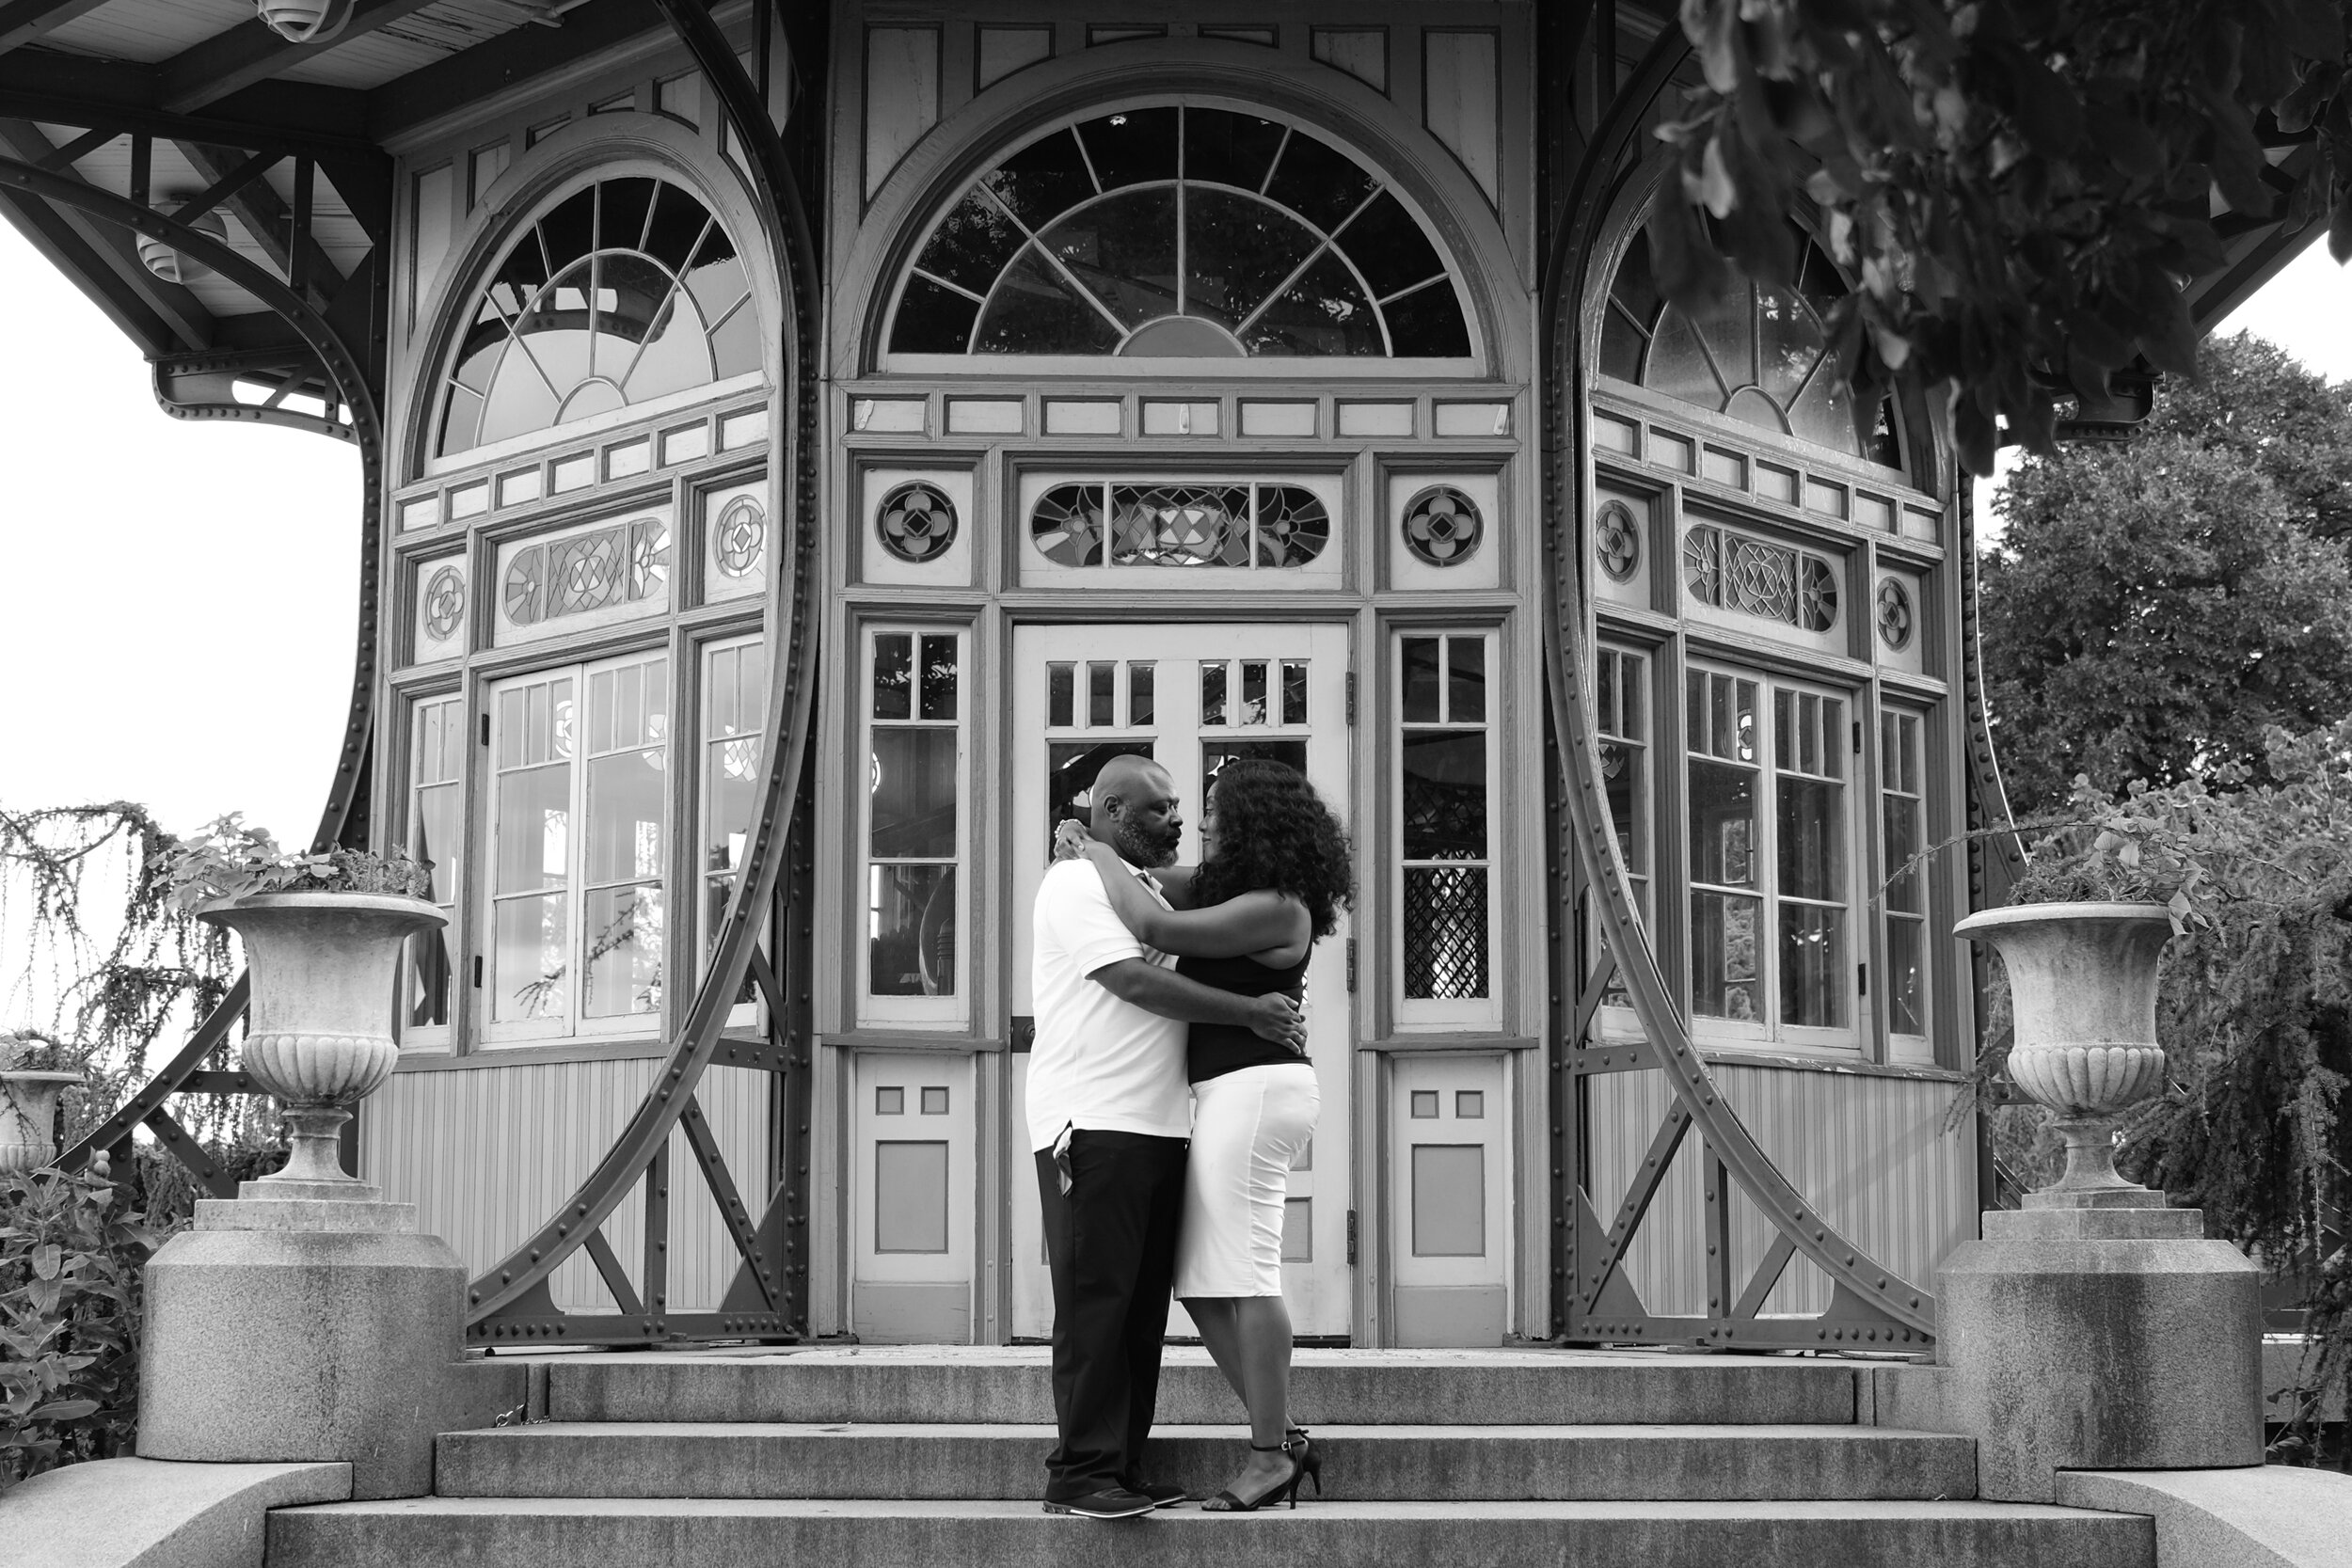 Patterson Park Engagement Session with Black Photographers Megapixels media in Baltimore Maryland (31 of 32).jpg